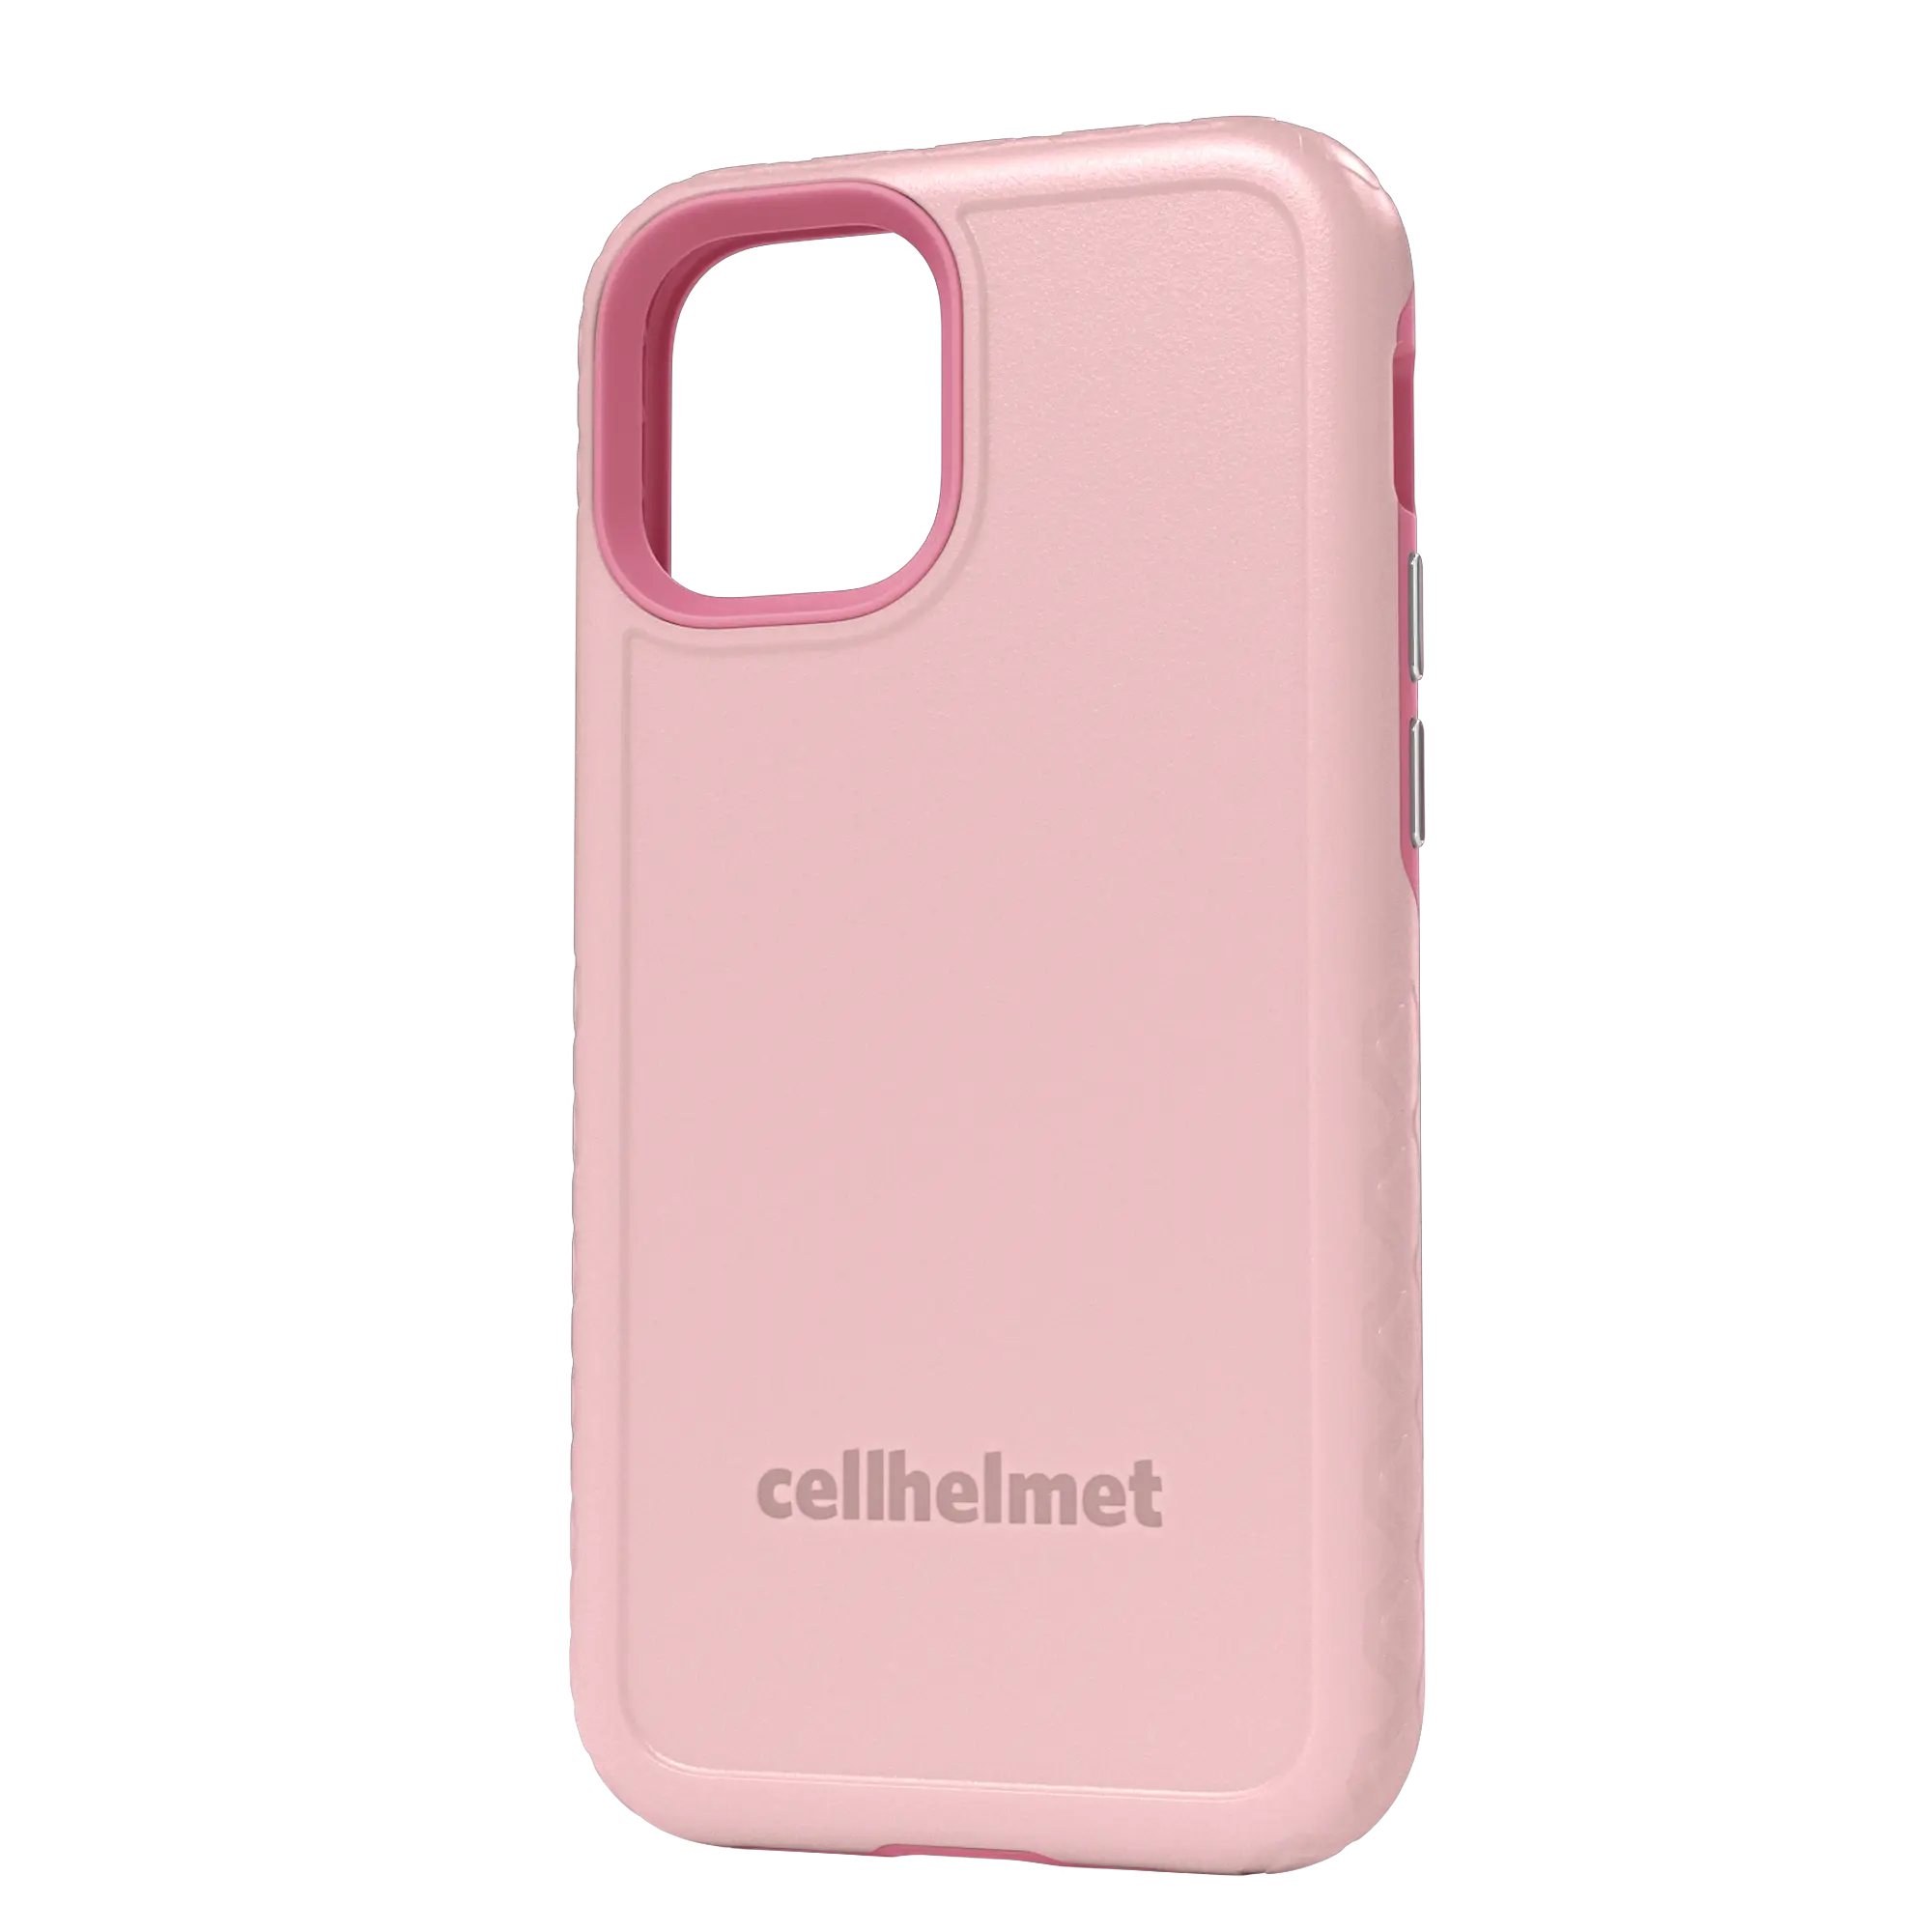 Pink cellhelmet Personalized Case for iPhone 12 Mini